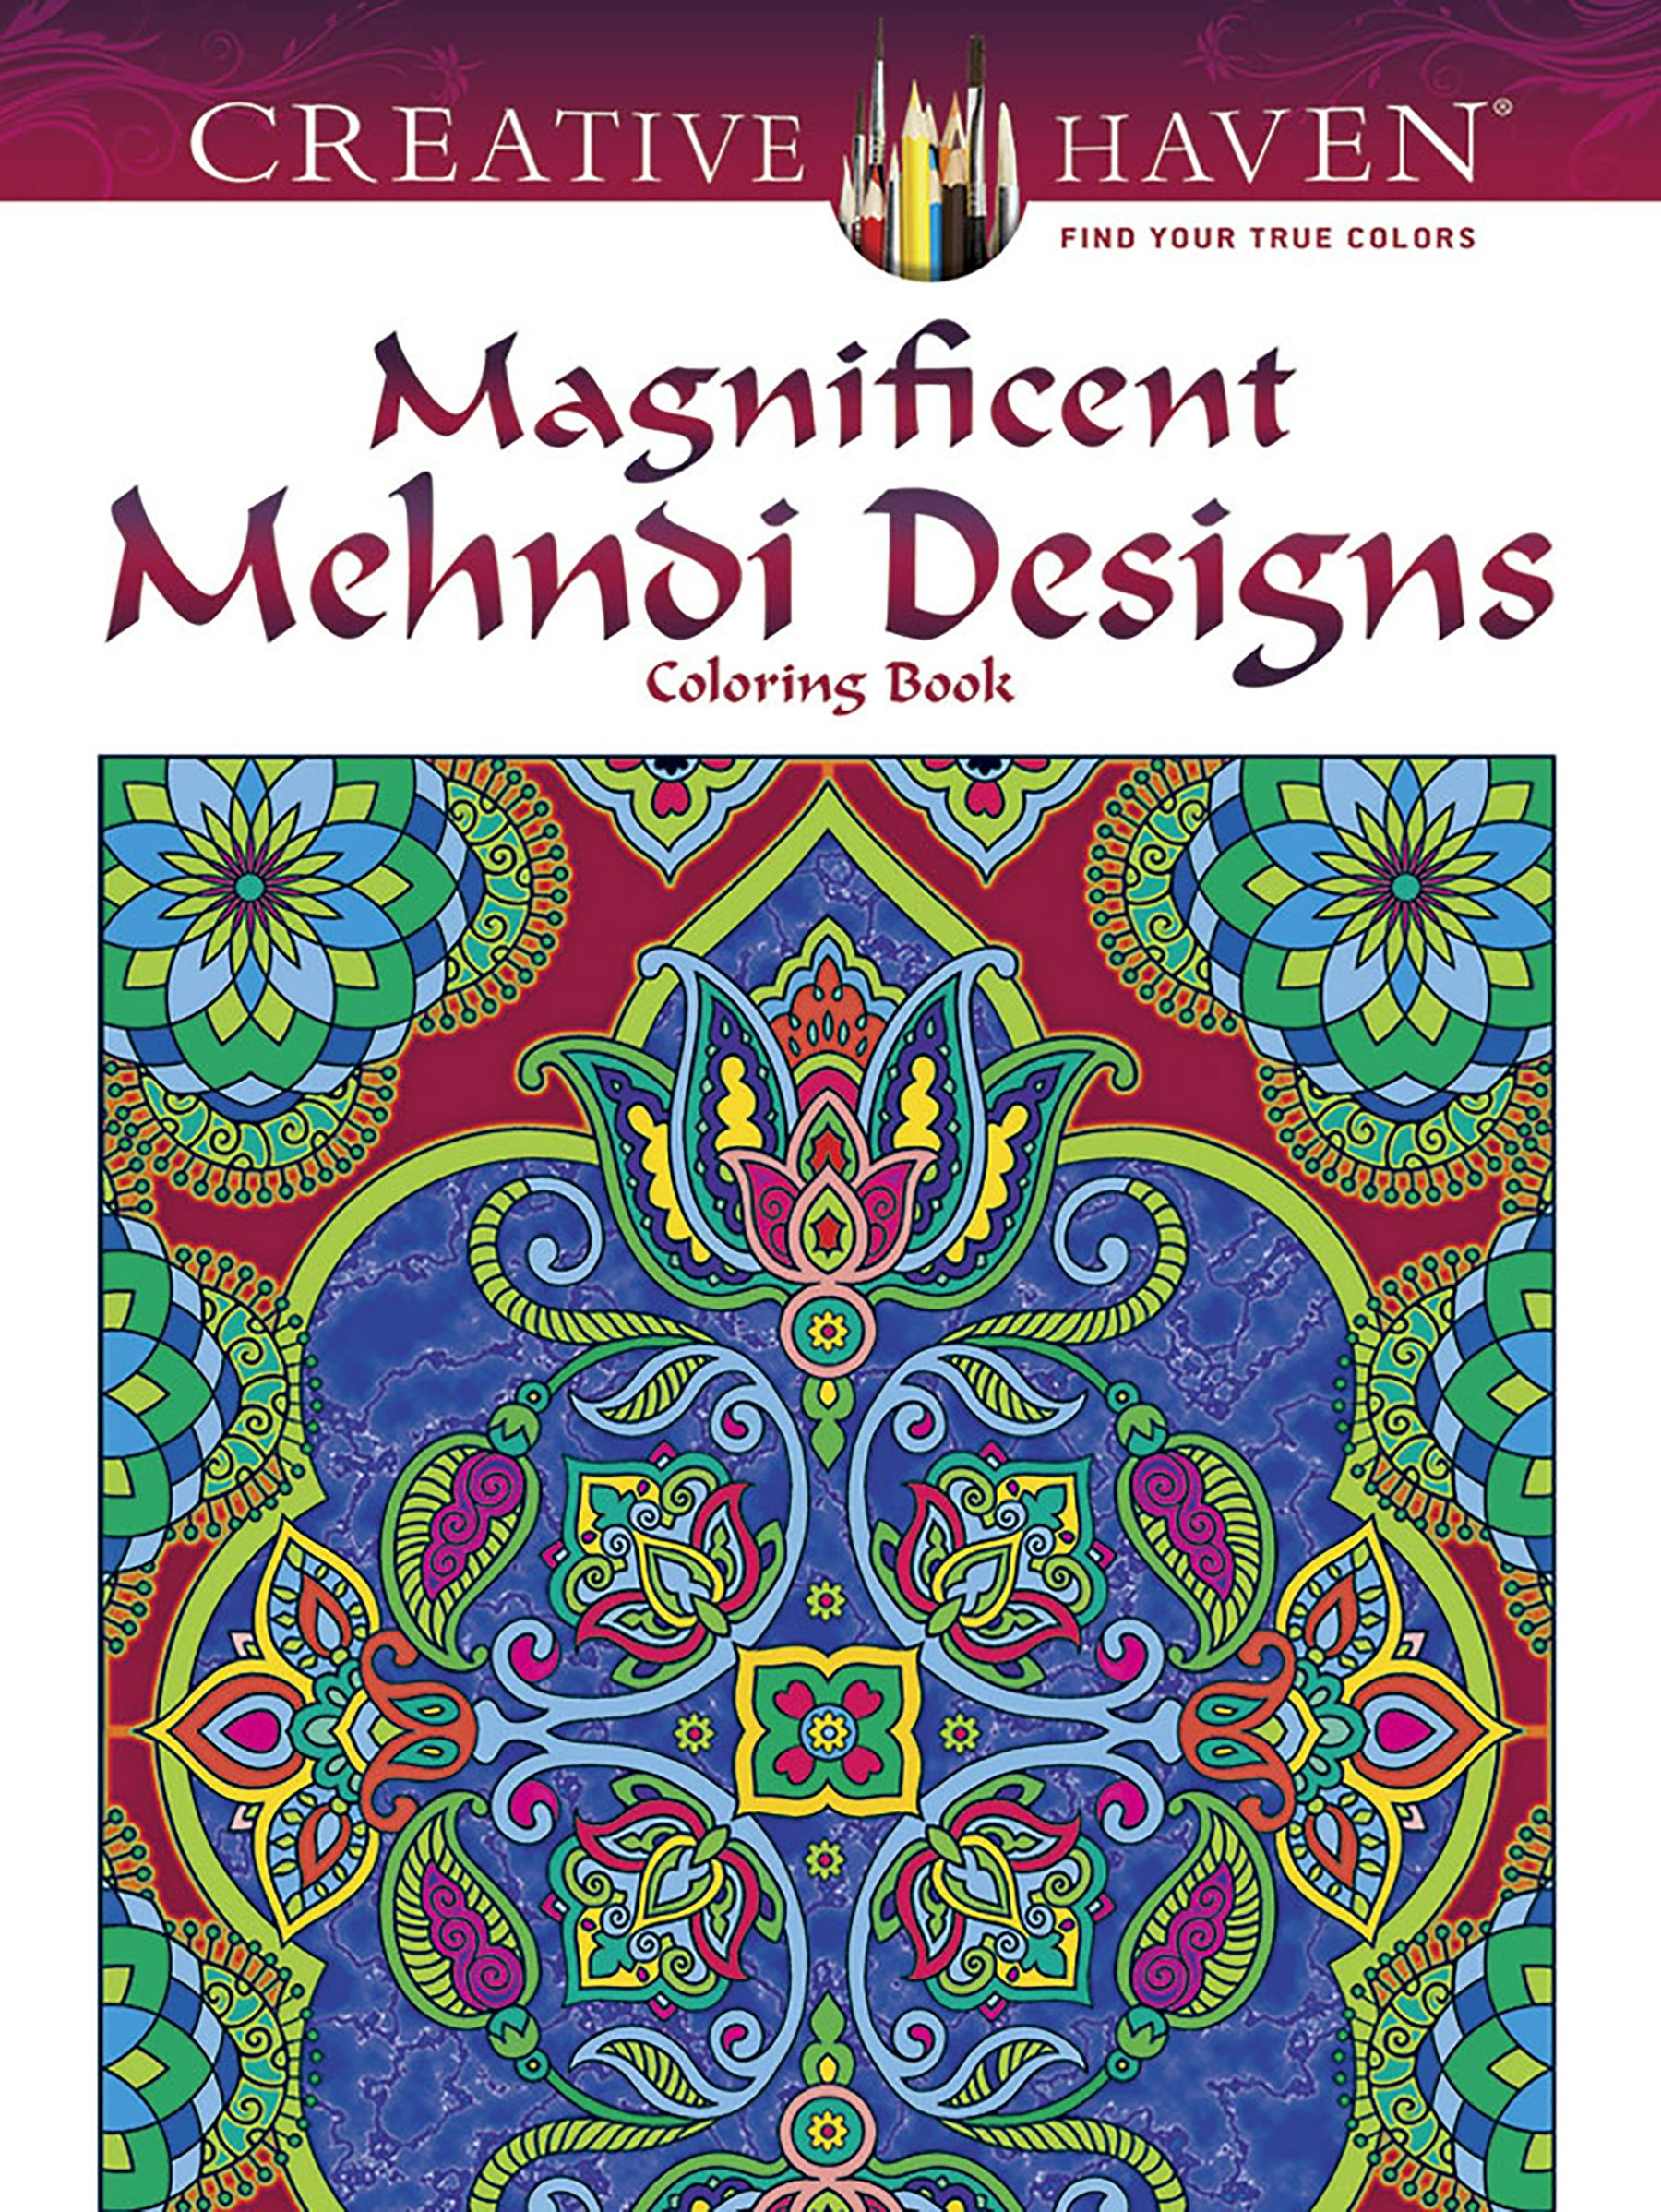 Circular pattern in form of mandala for Henna, Mehndi, tattoo,flower  pattern design, decoration. Decorative ornament in ethnic oriental style.  Coloring book page.